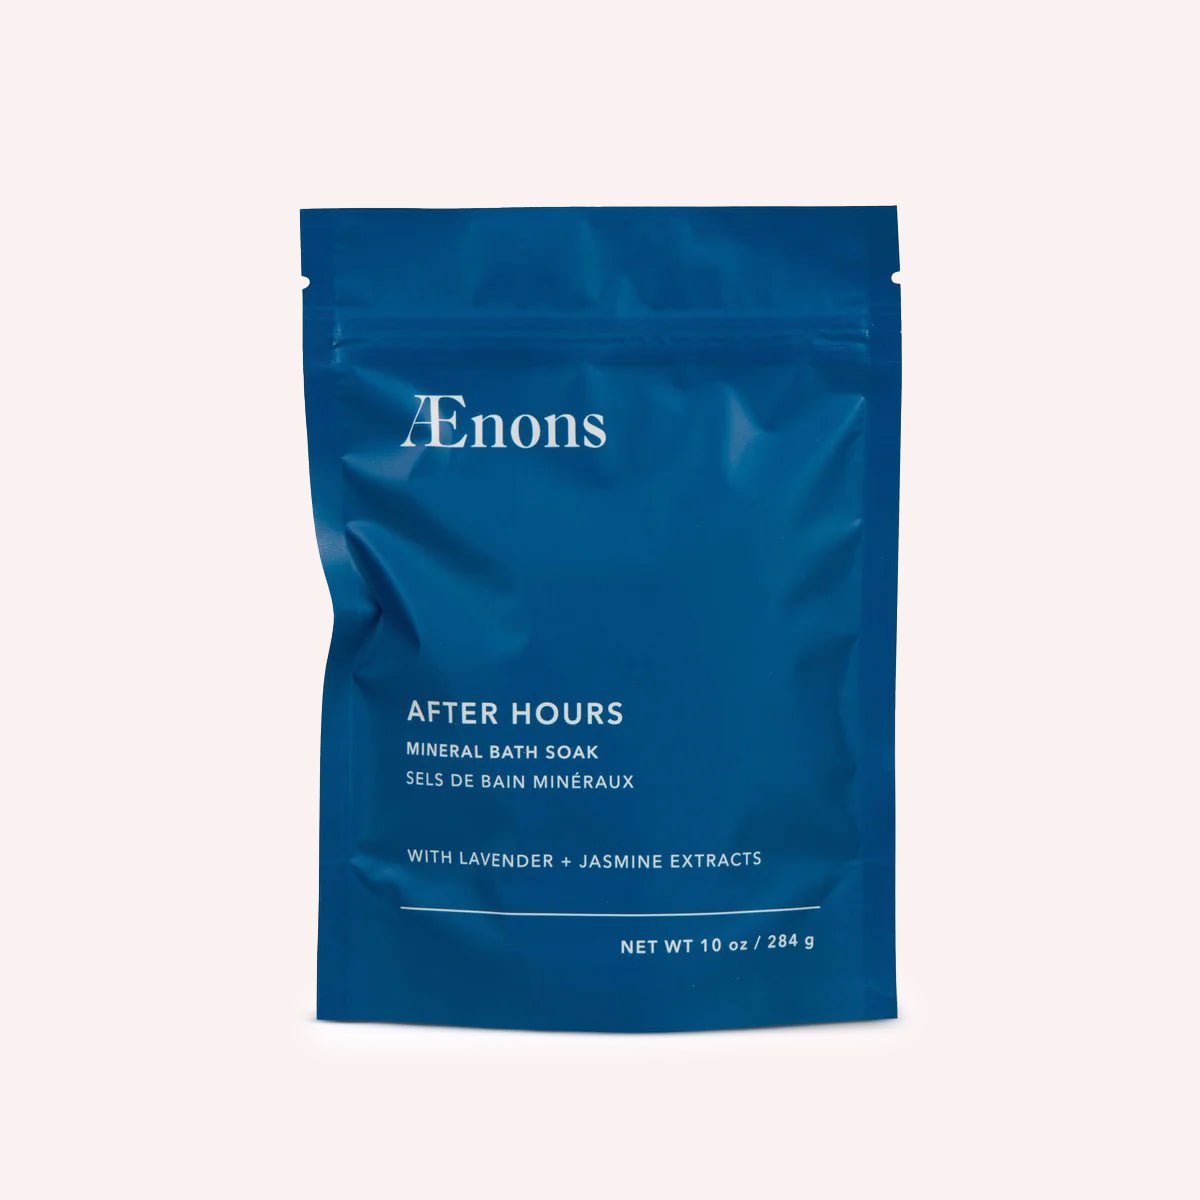 A bright blue package containing a mineral bath soak stands against a white background. The After Hours Mineral Bath Soak with Lavender + Jasmine Extracts is crafted by Aenons and made in Los Angeles, CA.